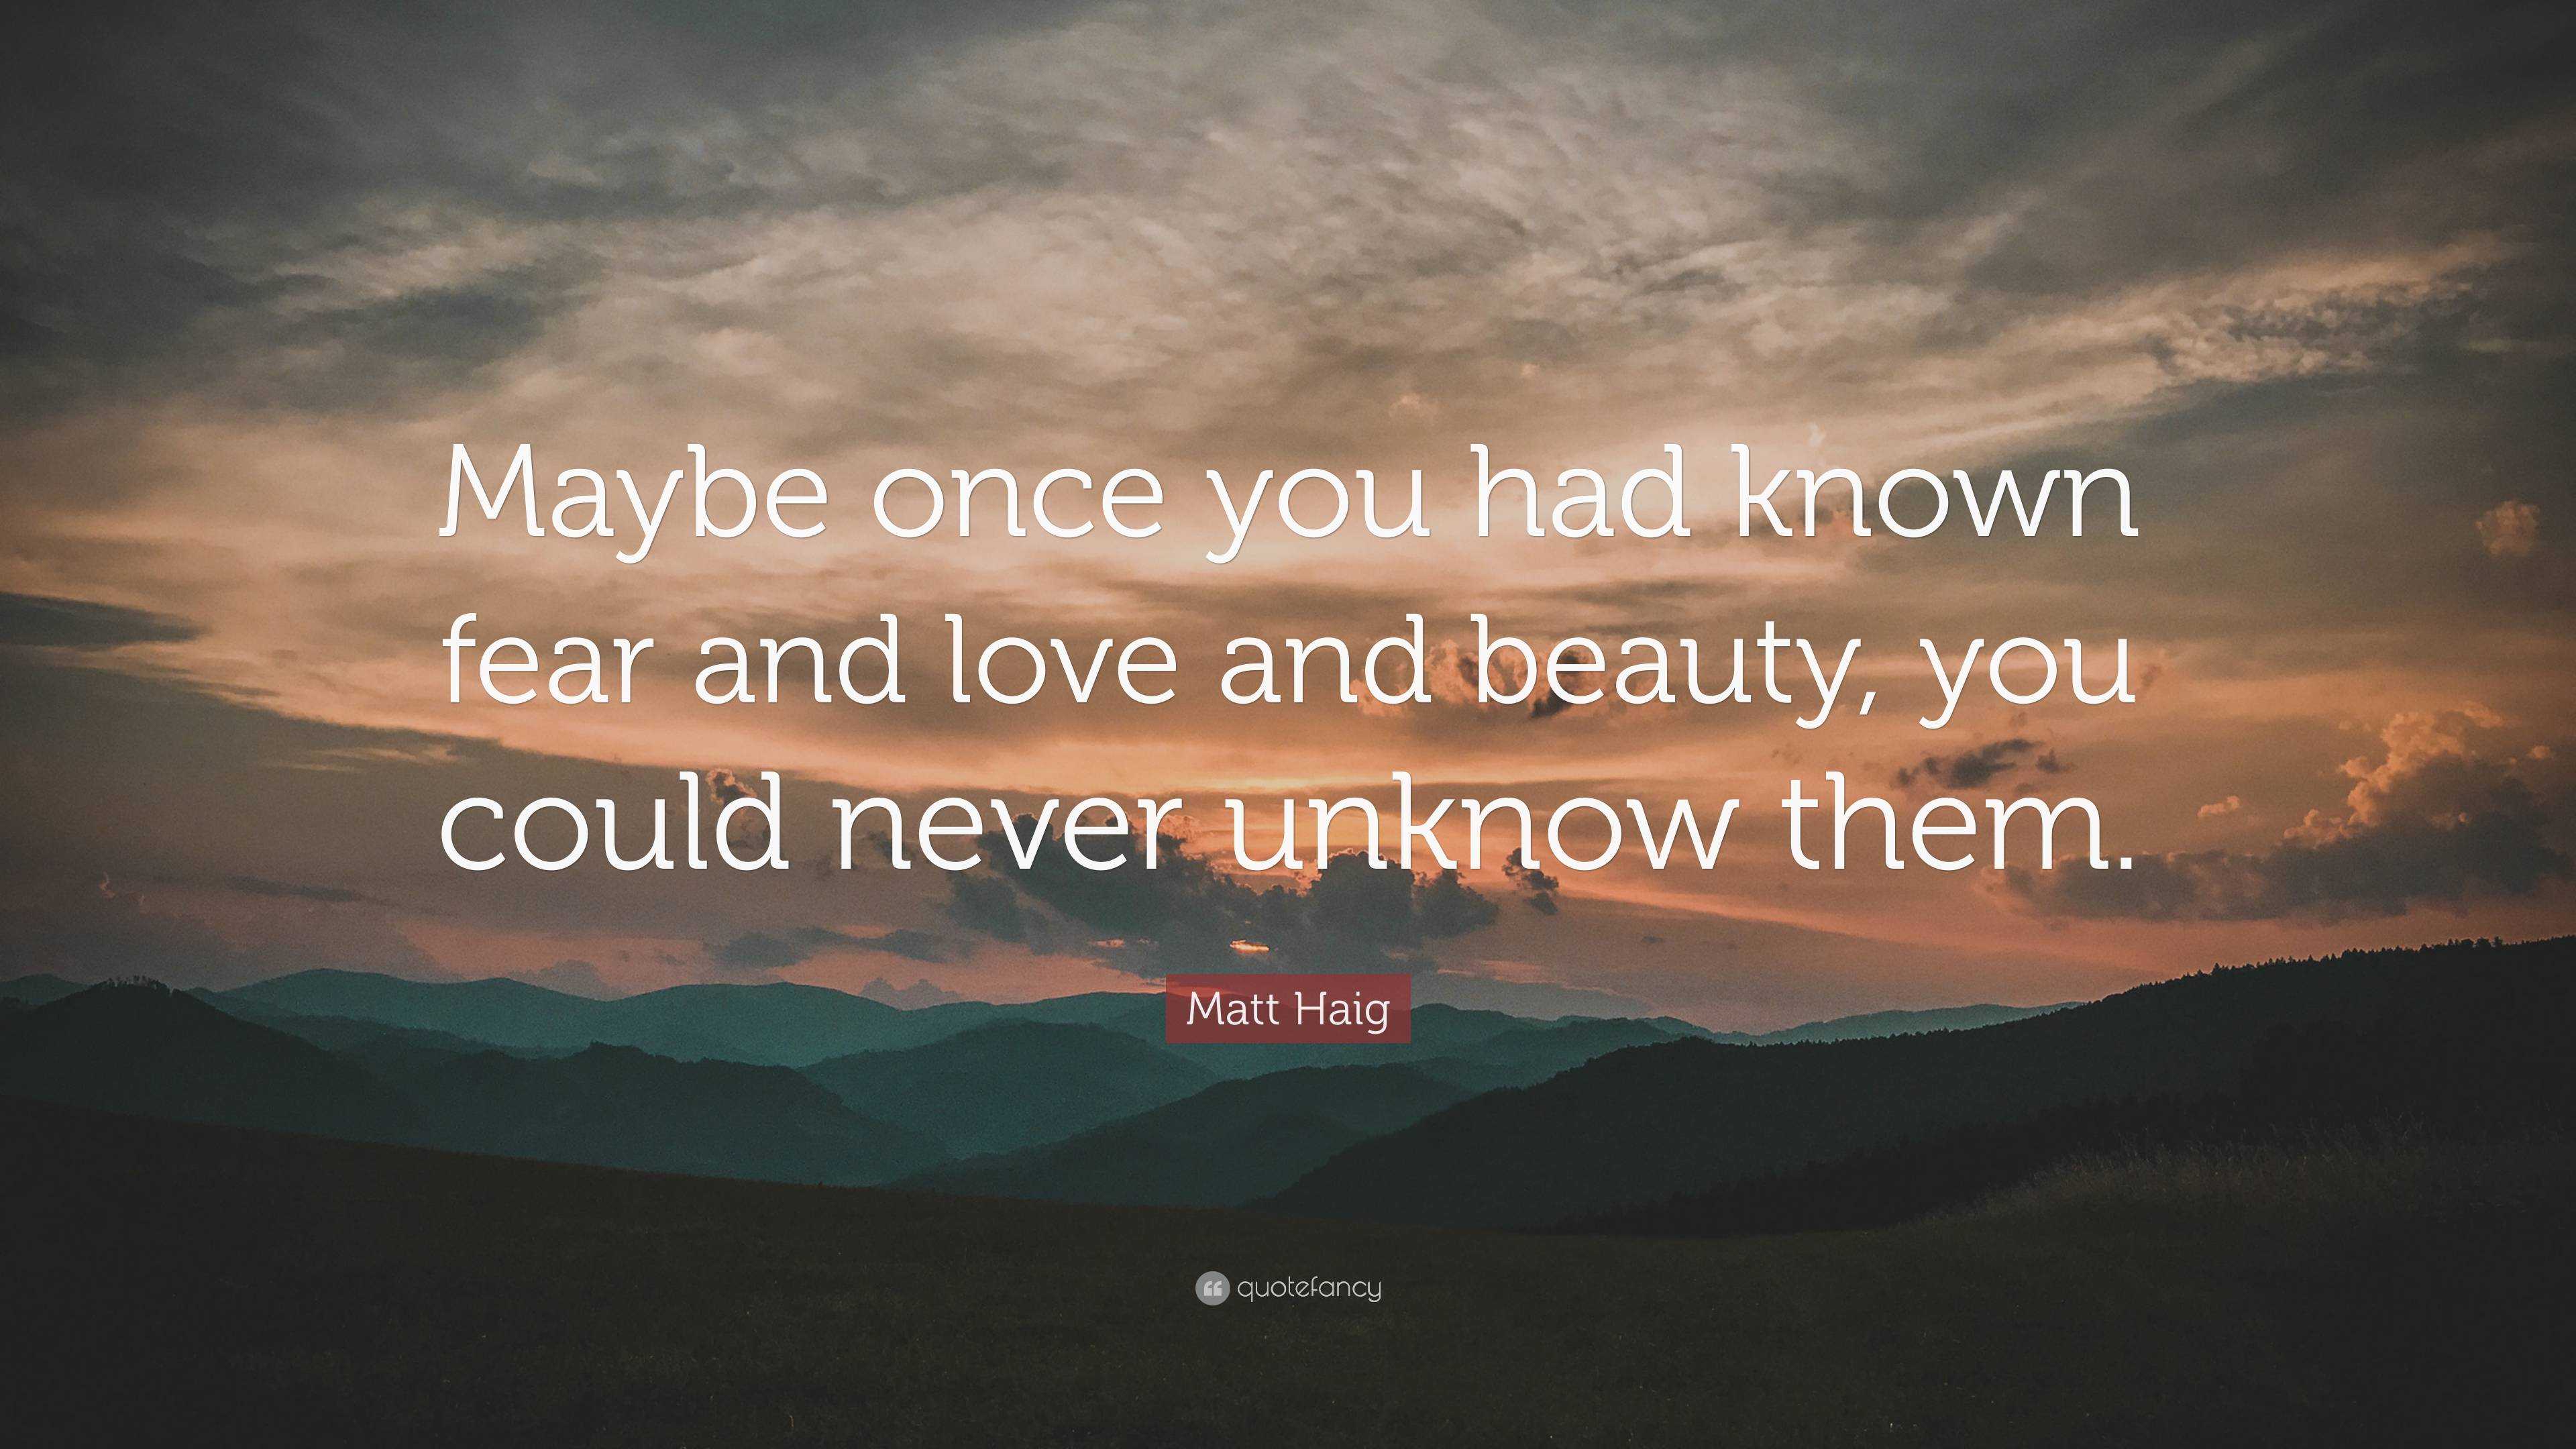 Matt Haig Quote: “Maybe once you had known fear and love and beauty ...